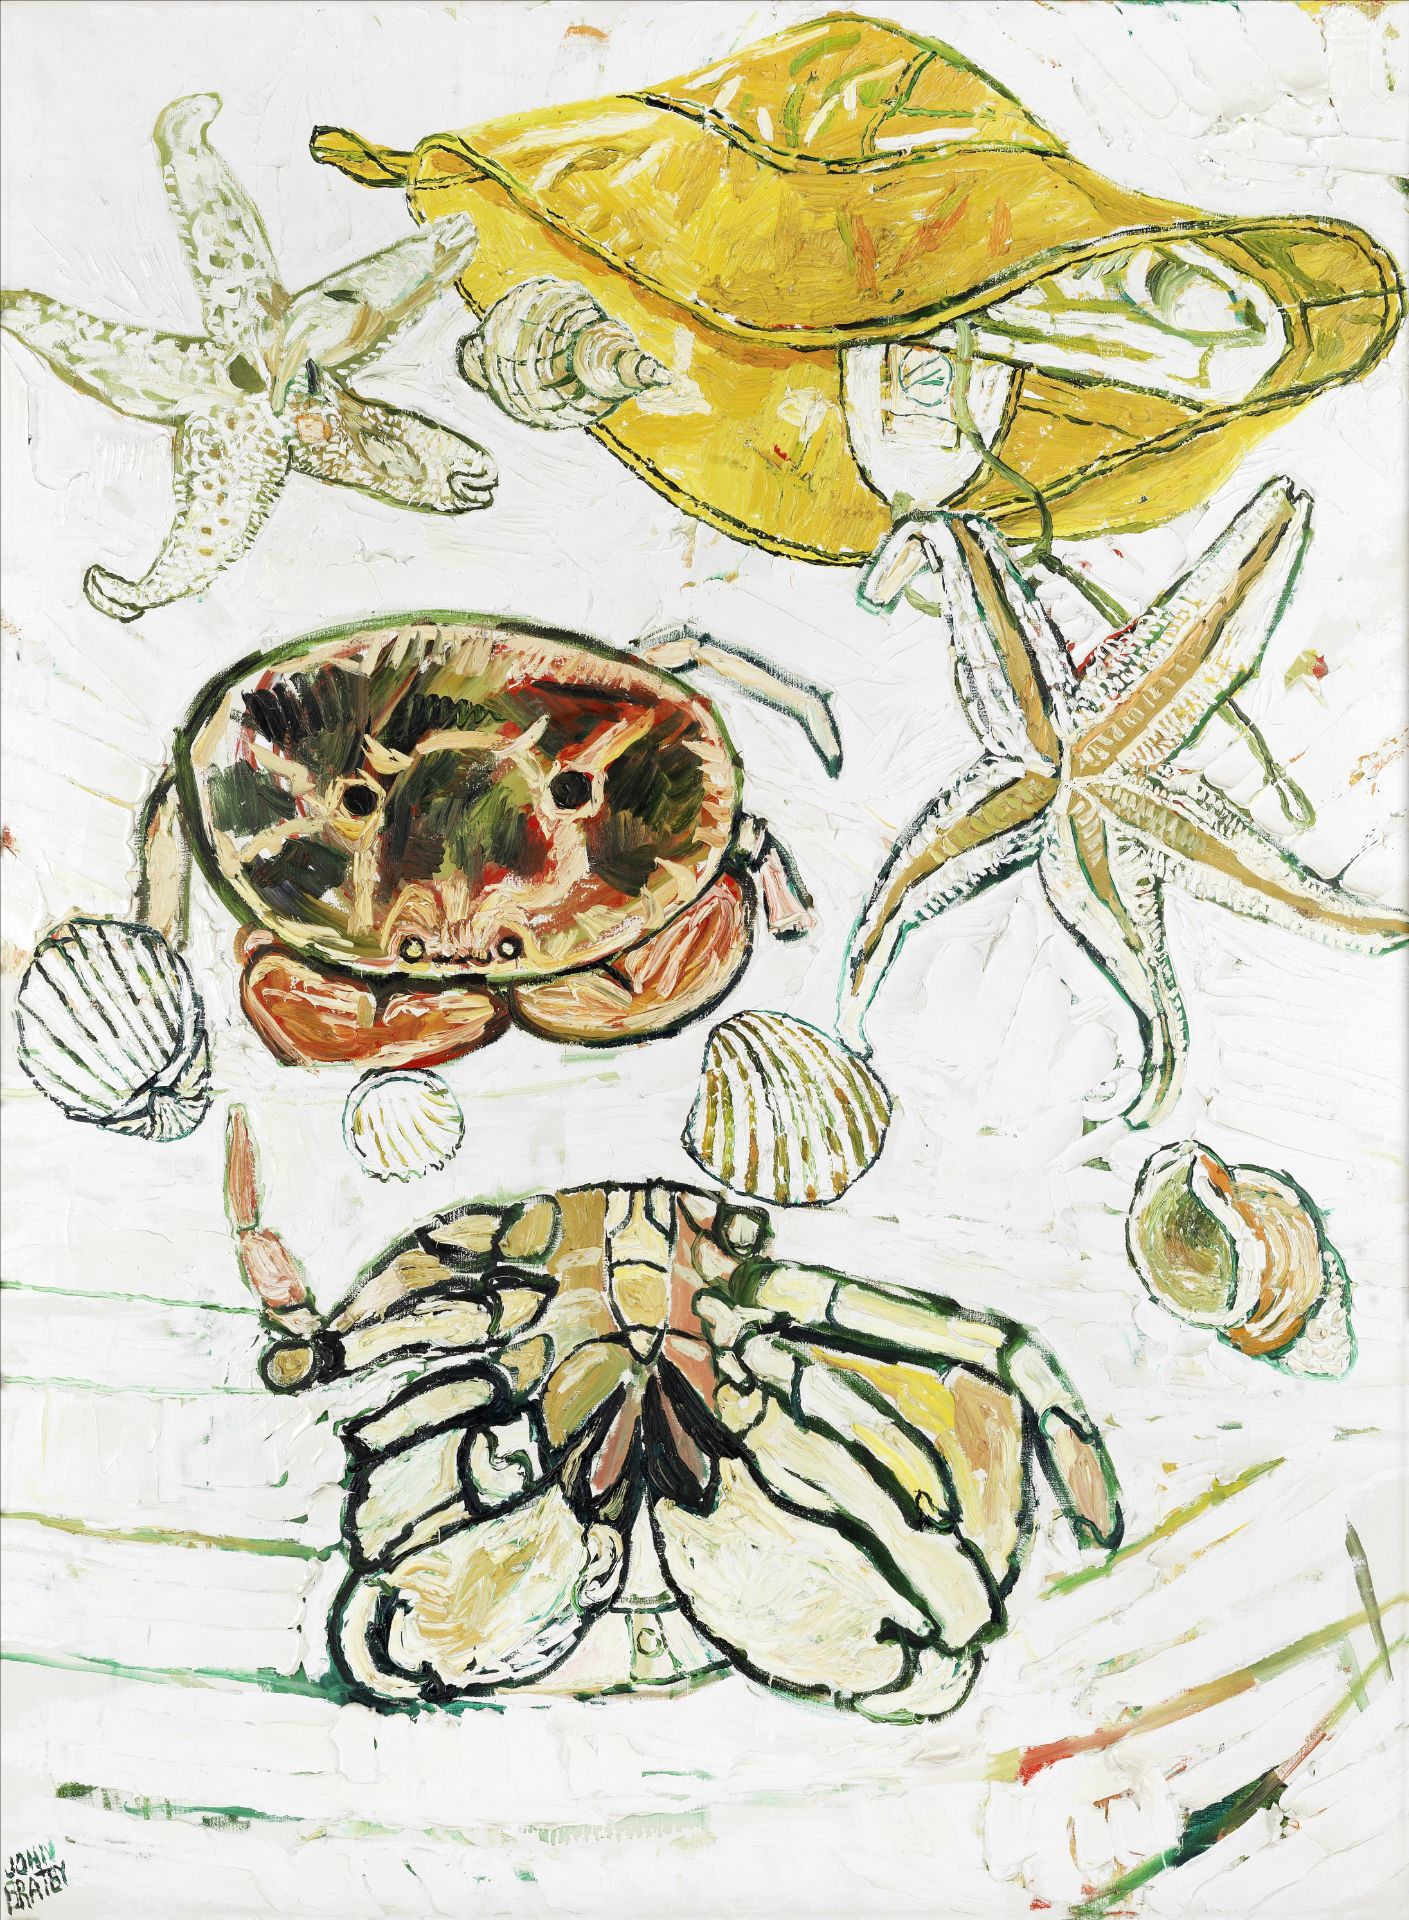 John Bratby R.A. (British, 1928-1992) Starfish, a Sou'wester, Shells and Crabs